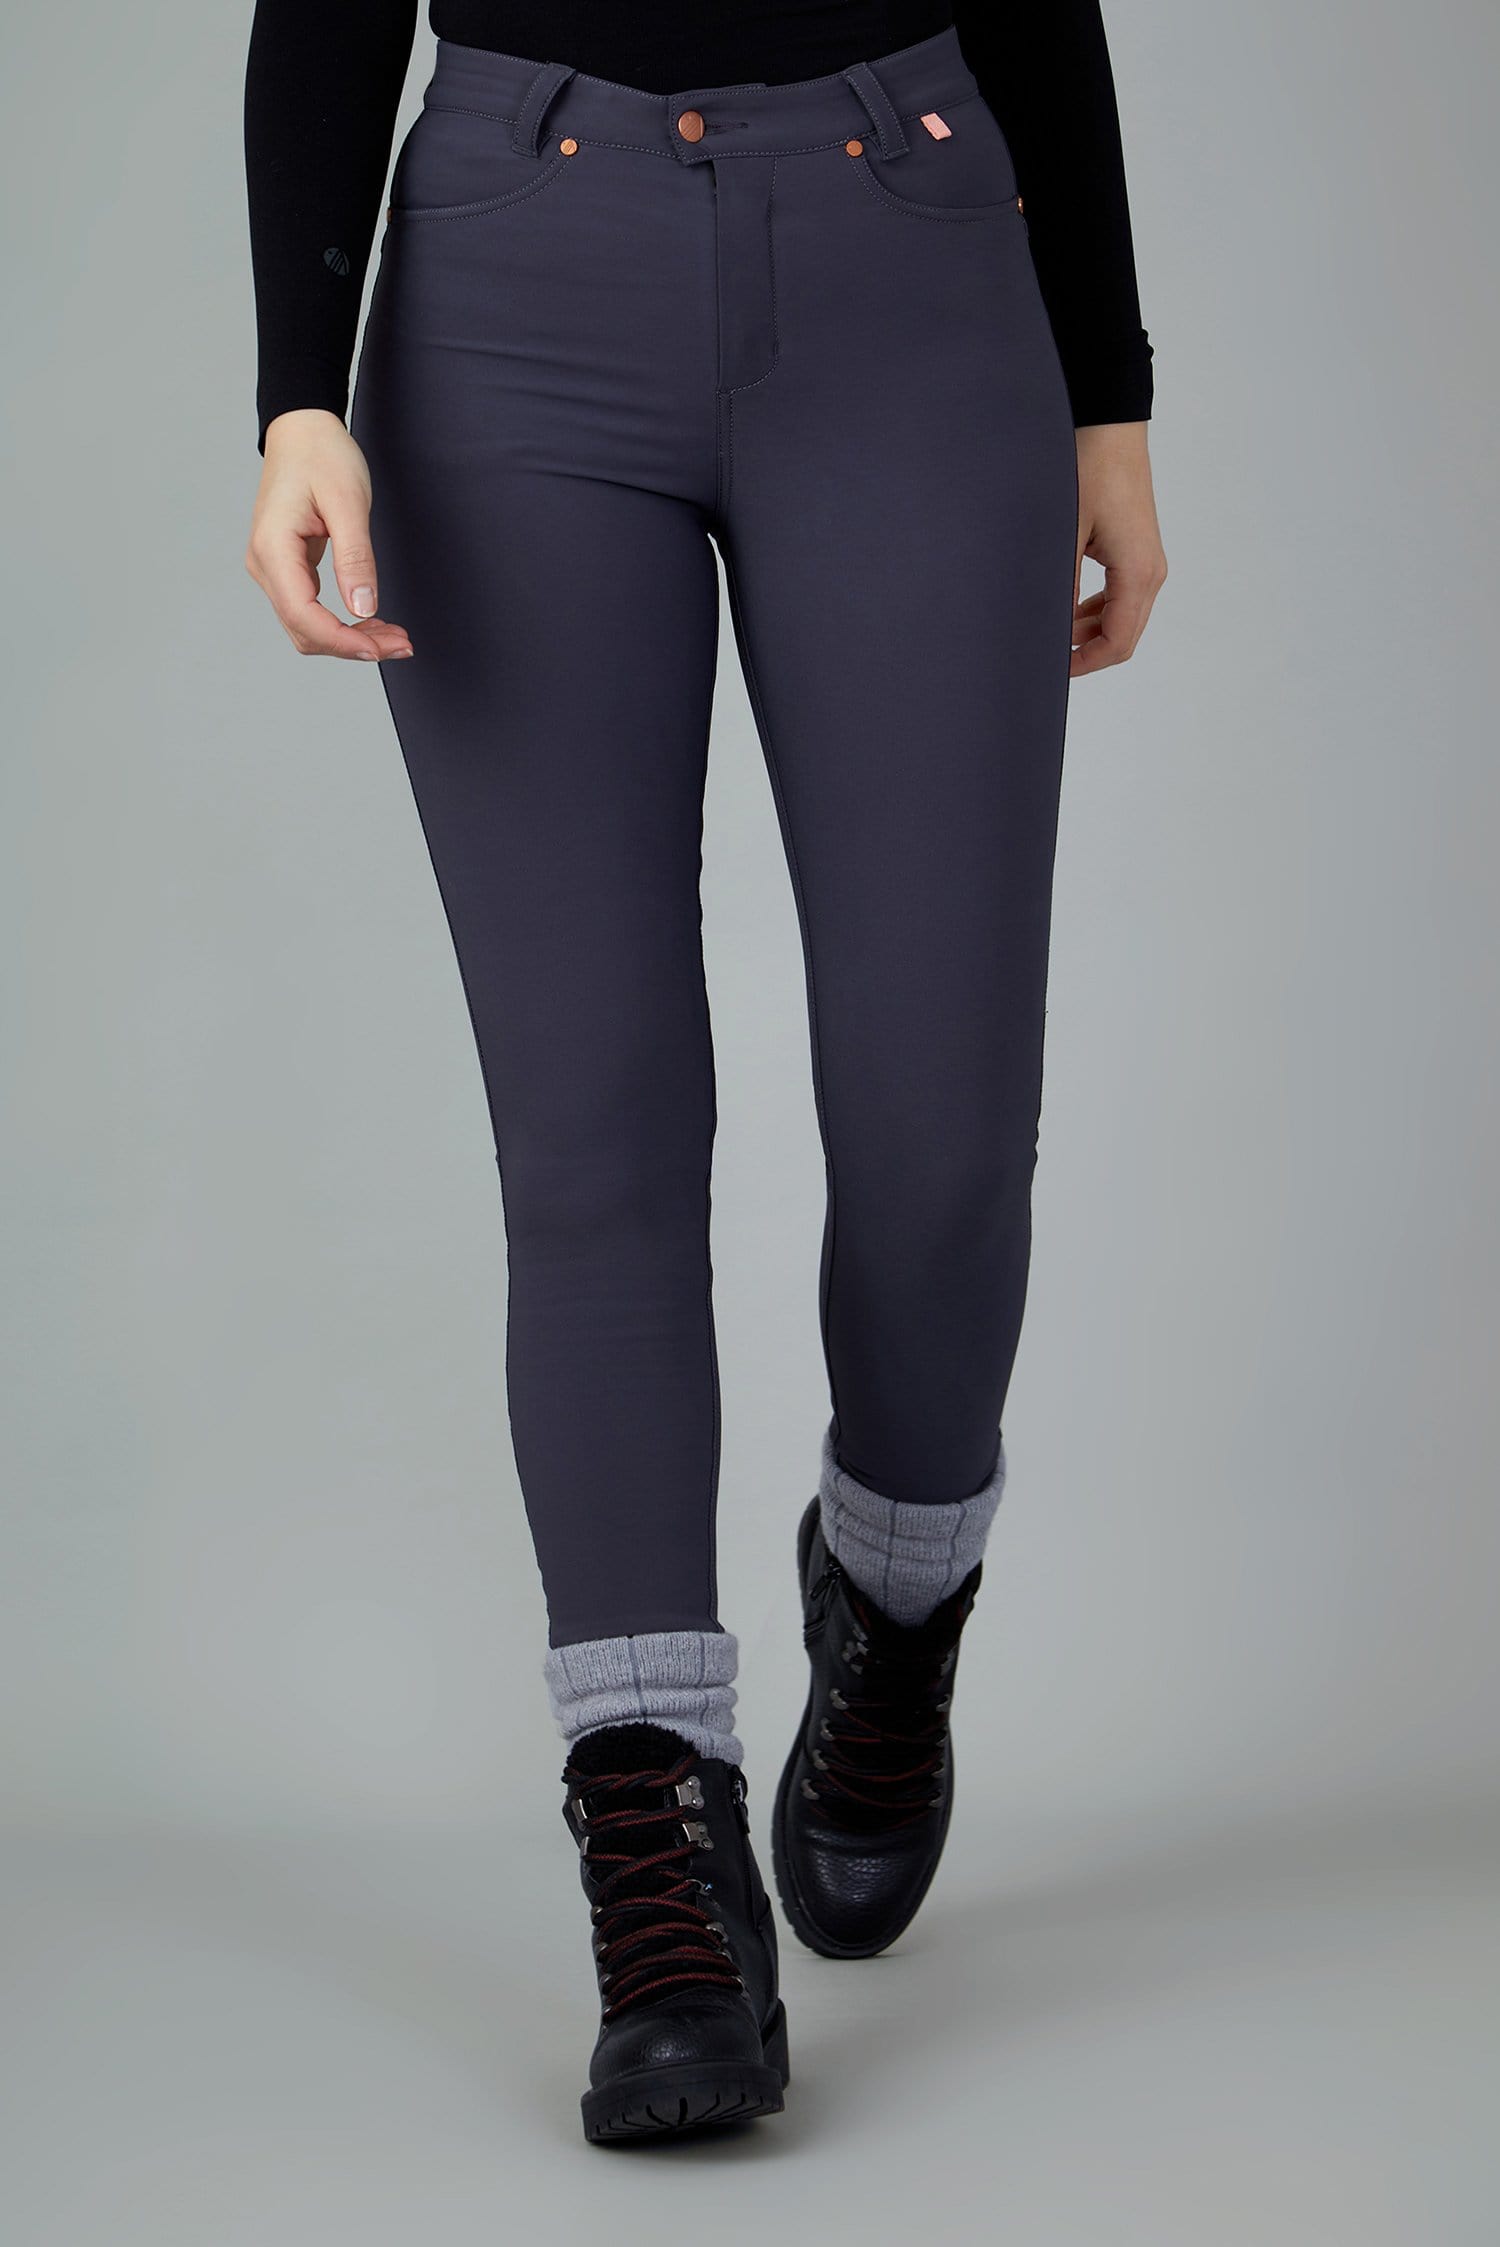 The Aventurite Stretch Skinny Outdoor Trousers - Obsidian - 40r / Uk22 - Womens - Acai Outdoorwear